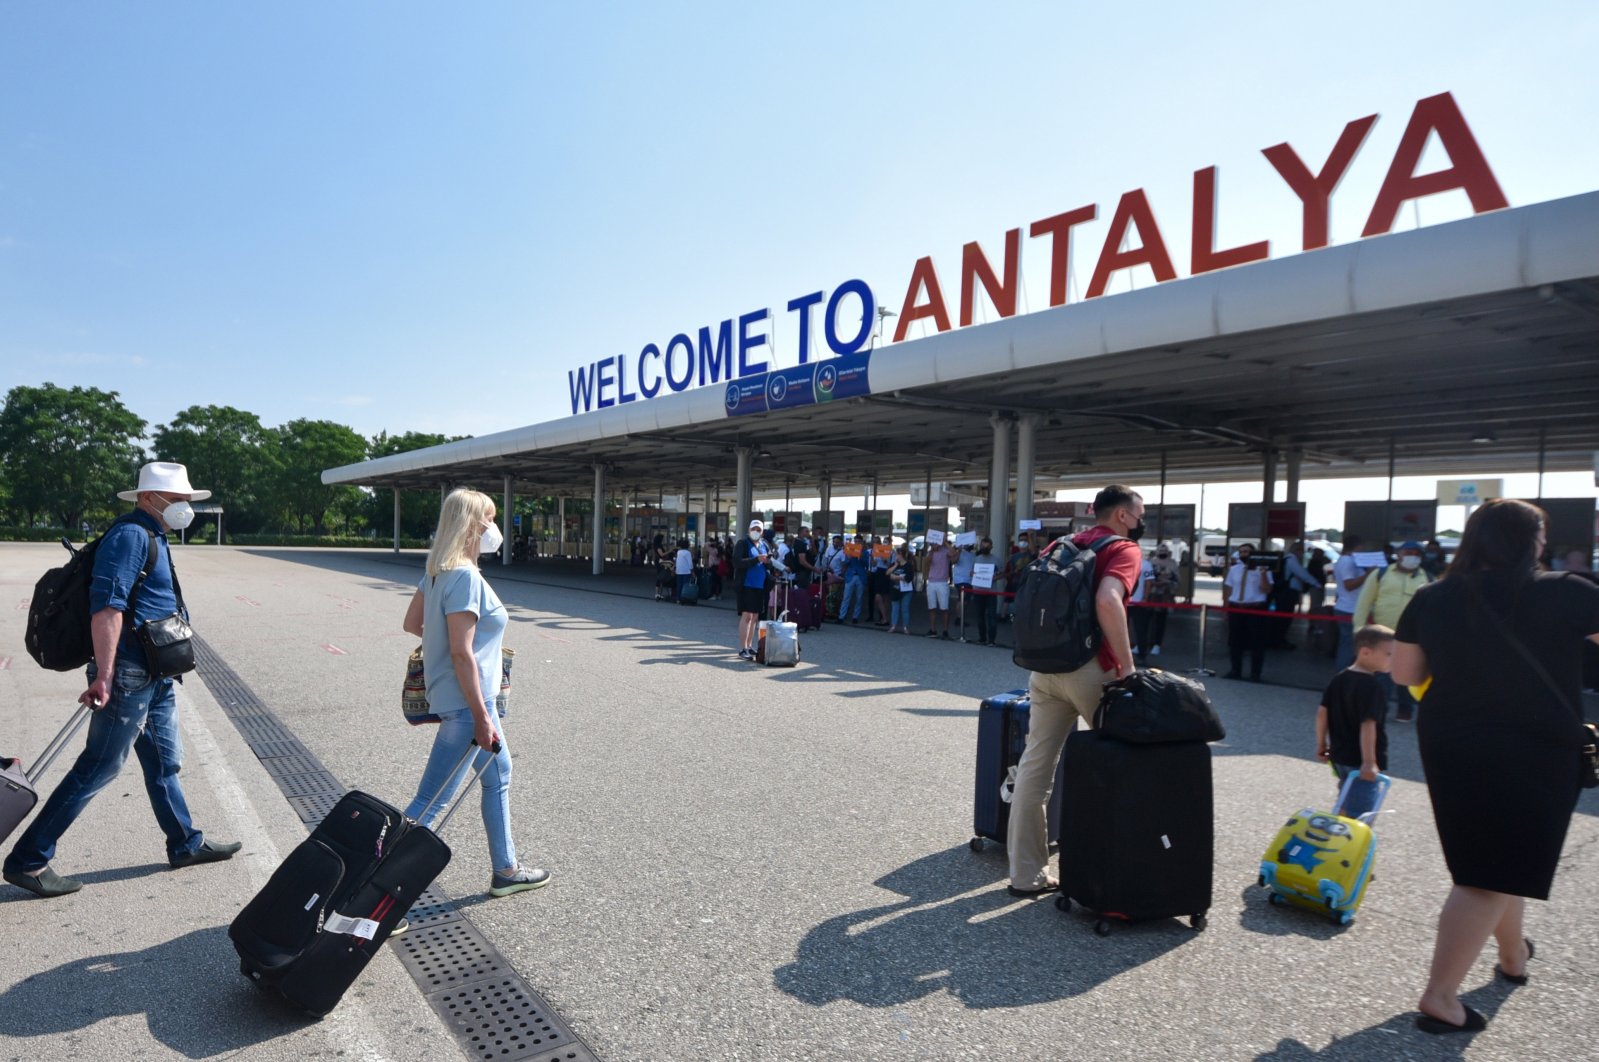 Tourists leave an airport after arriving in Antalya, one of the most popular tourist destinations in the Mediterranean, Turkey, June 22, 2021. (DHA Photo)